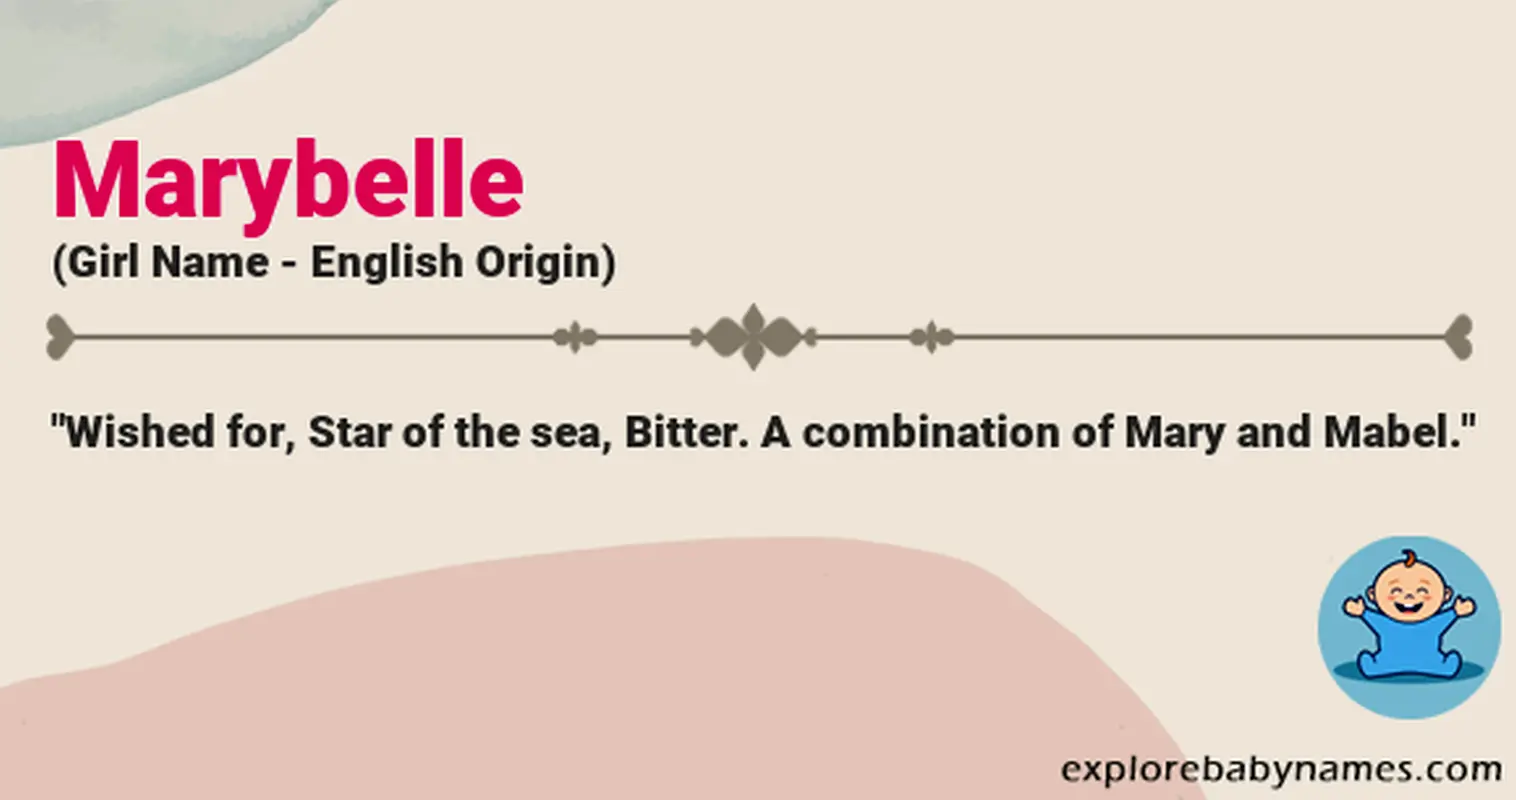 Meaning of Marybelle